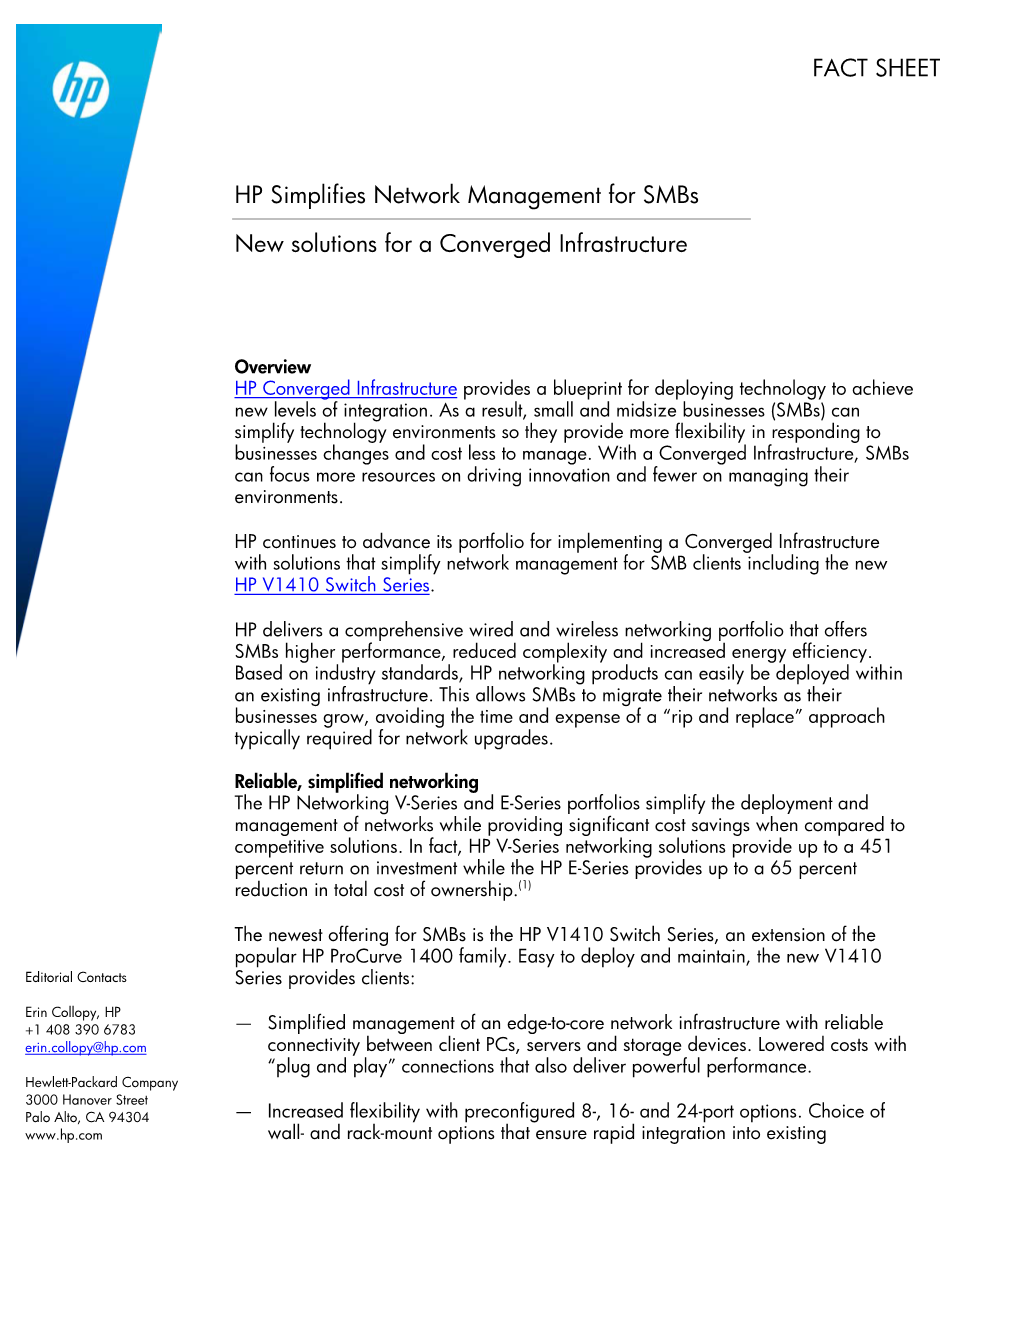 HP Simplifies Network Management for Smbs